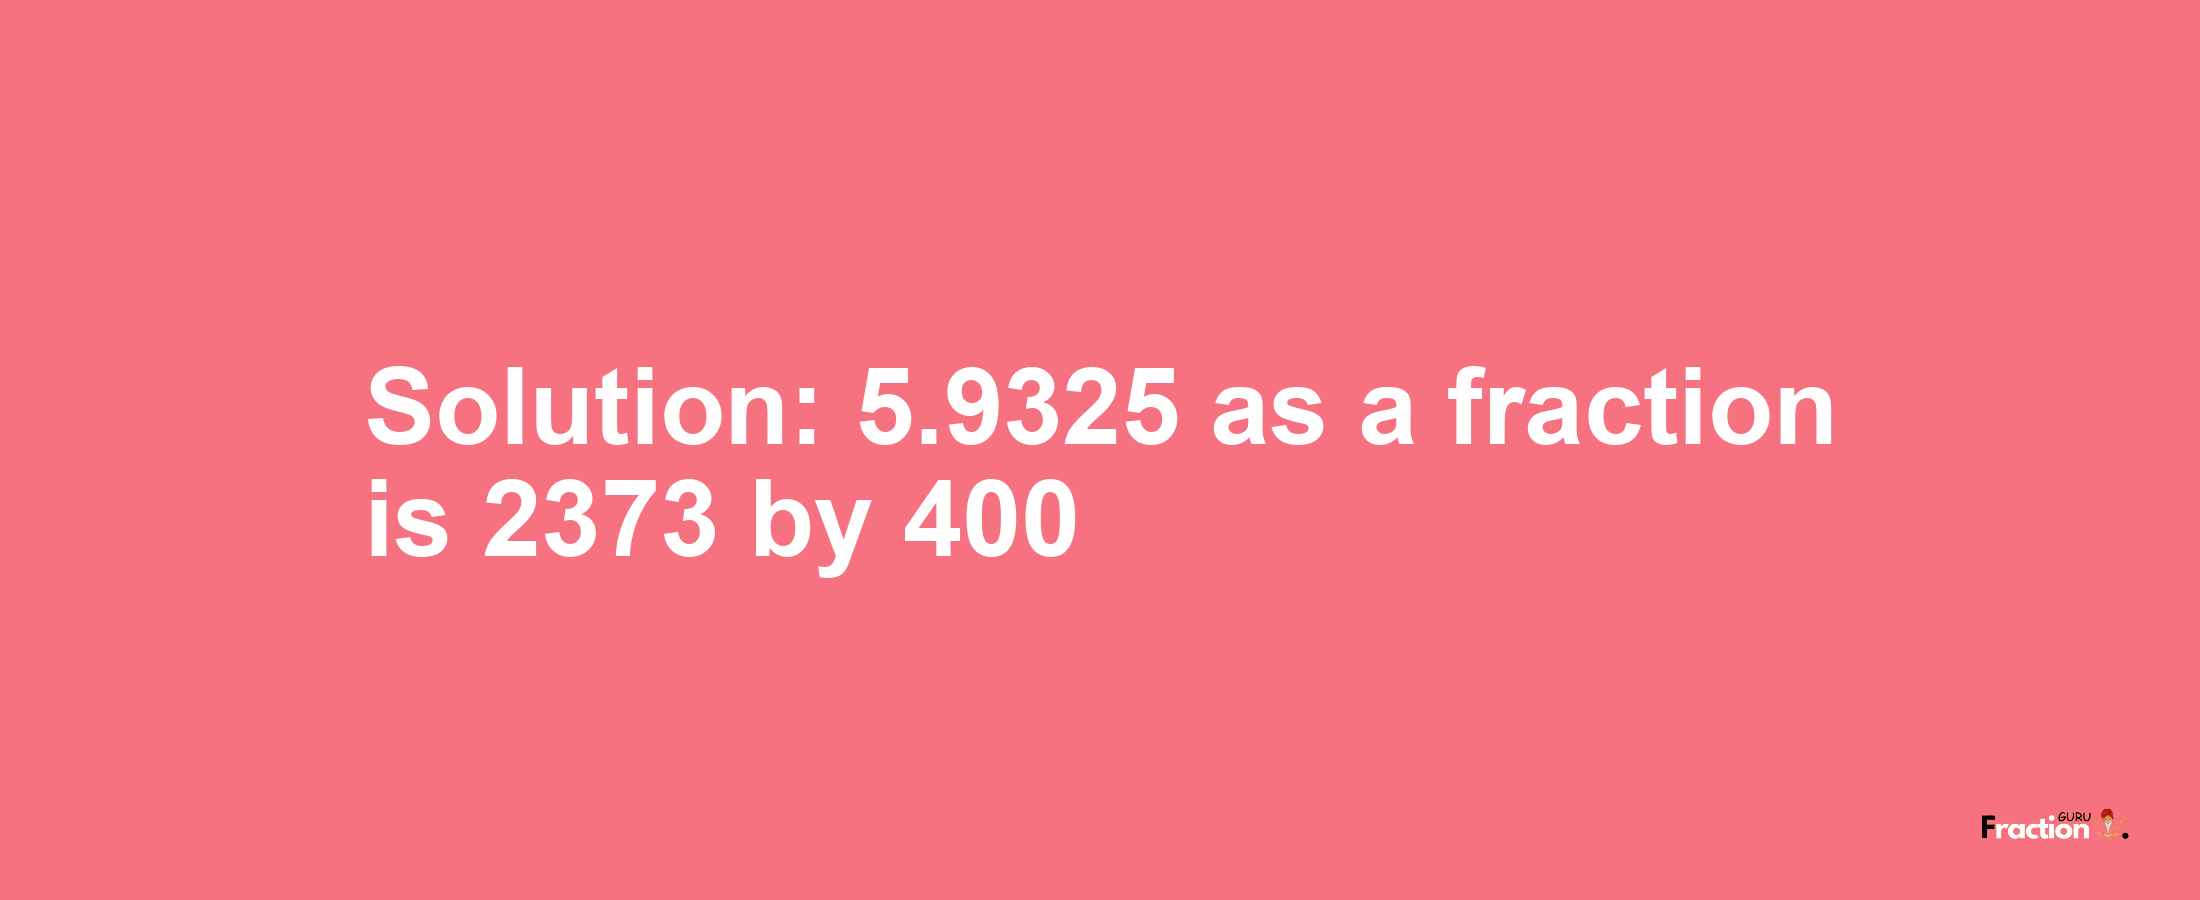 Solution:5.9325 as a fraction is 2373/400